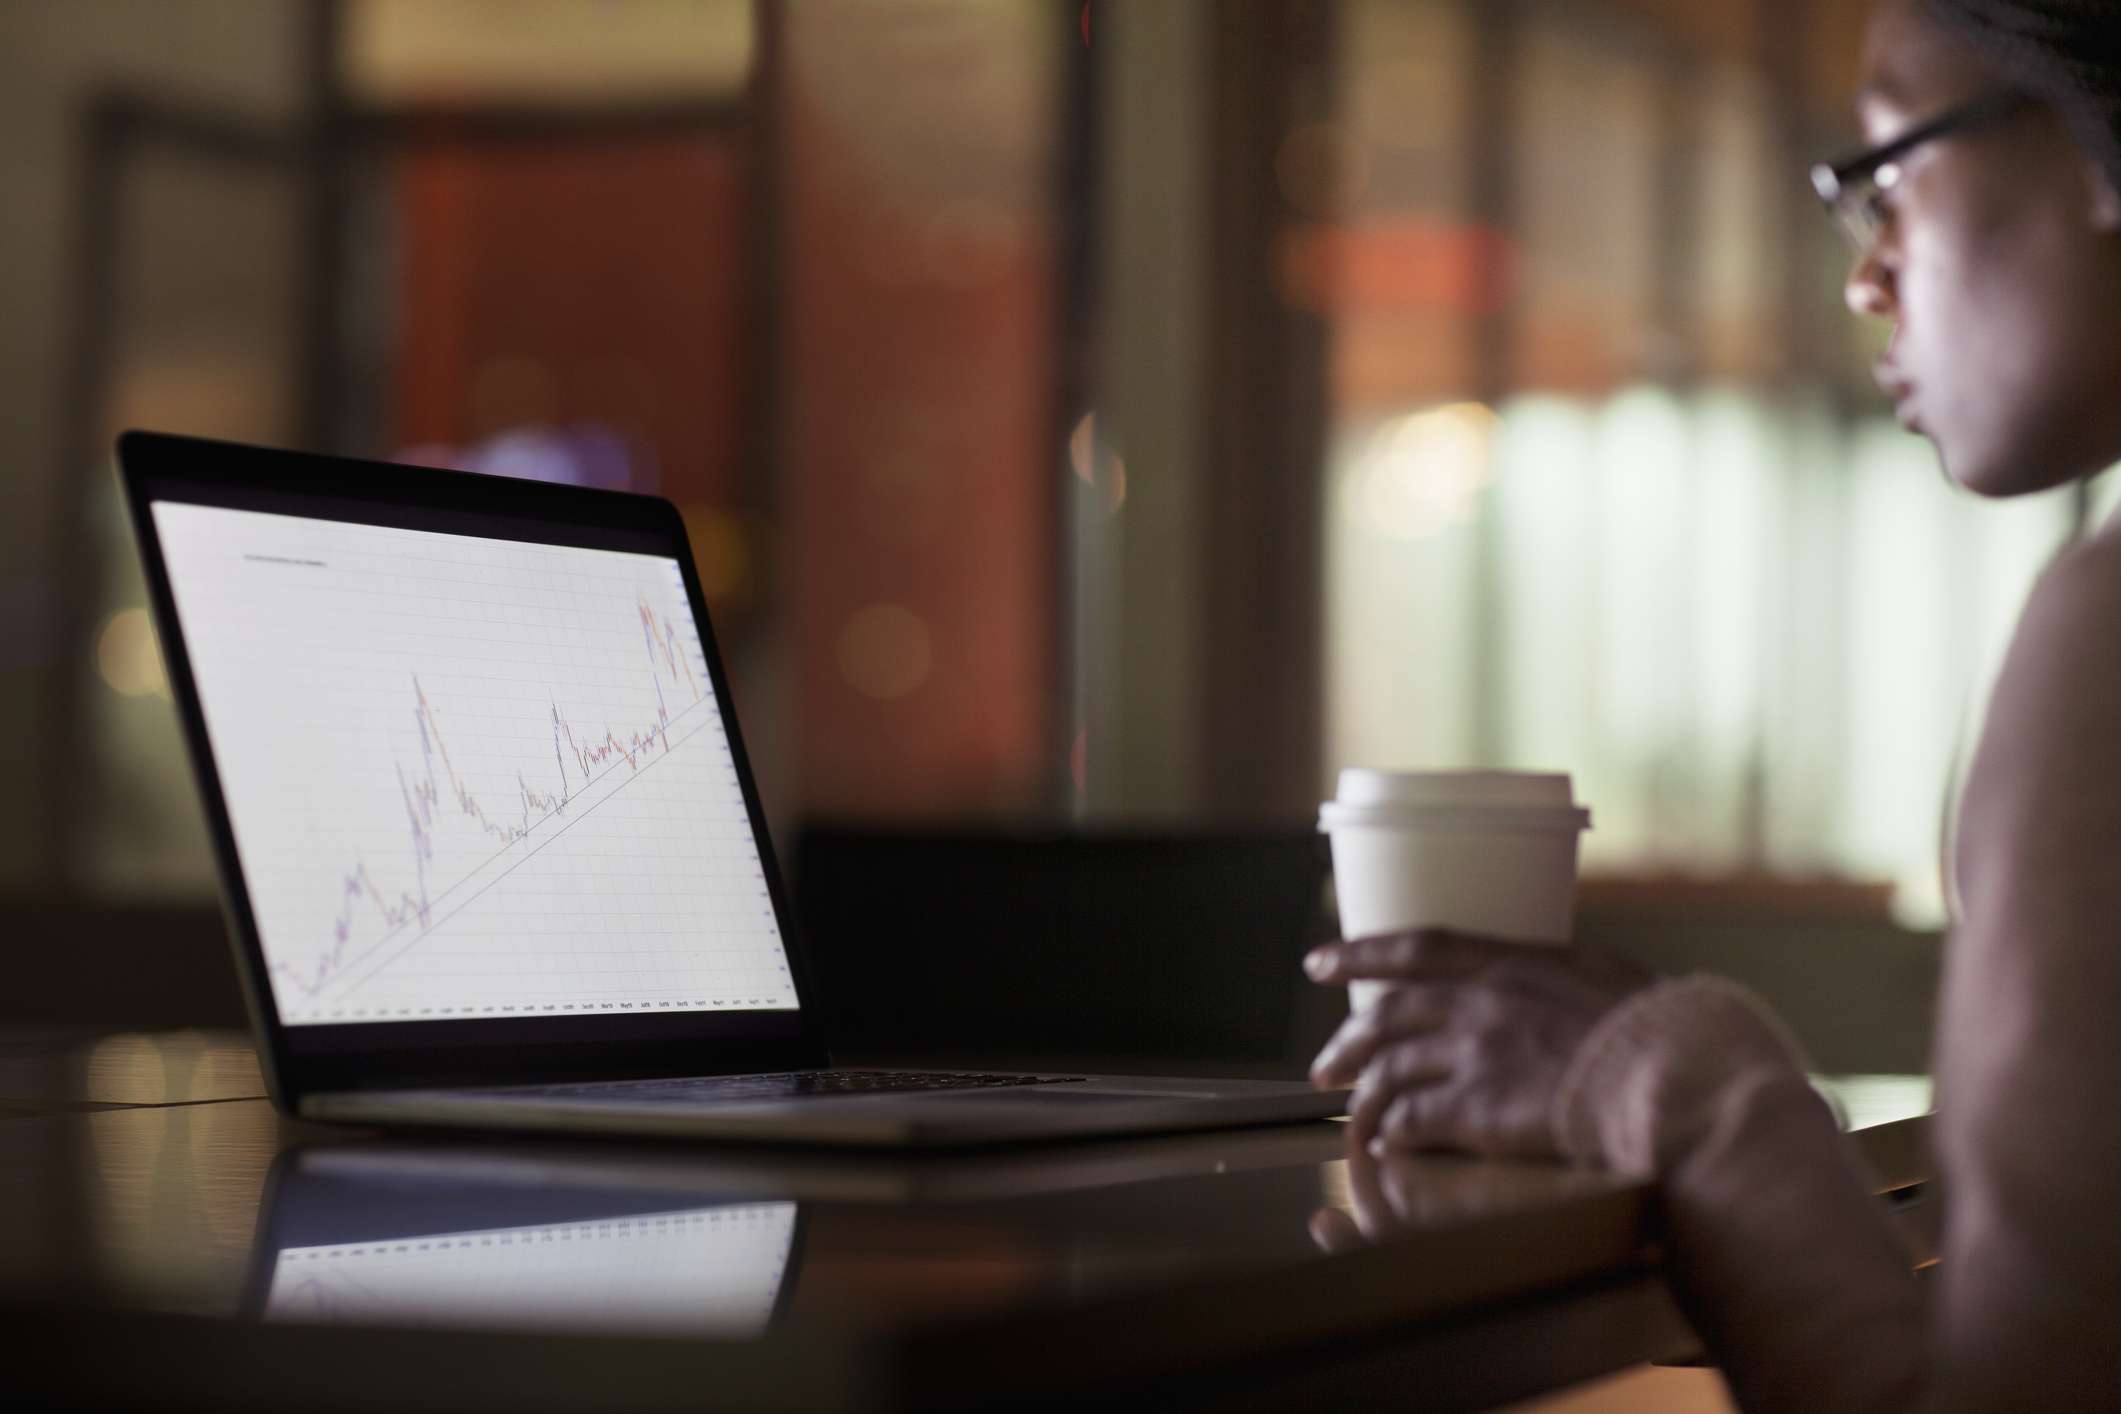 A woman viewing laptop screen with graph diagram.